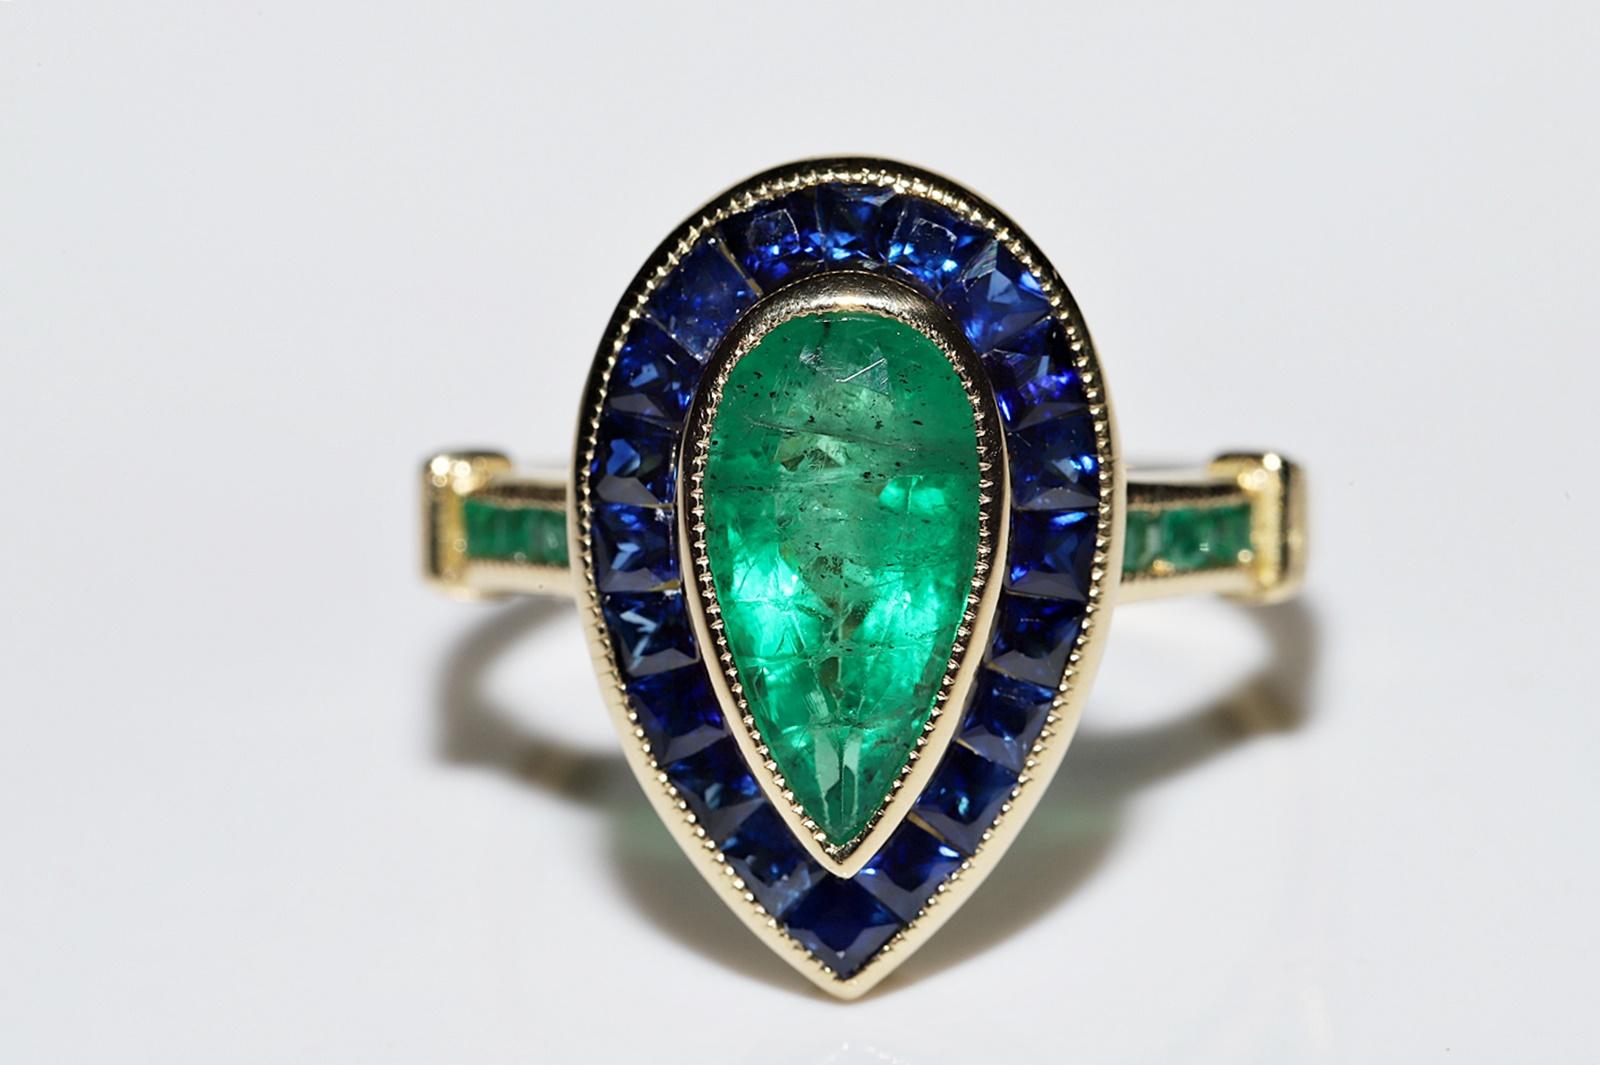 In very good condition.
Total weight is 5.3 grams.
Totally is emerald 1.58 ct.
Totally is sapphire 1.45 ct.
Ring size is US 6.5 
We can make any size.
Box is not included.
Please contact for any questions.